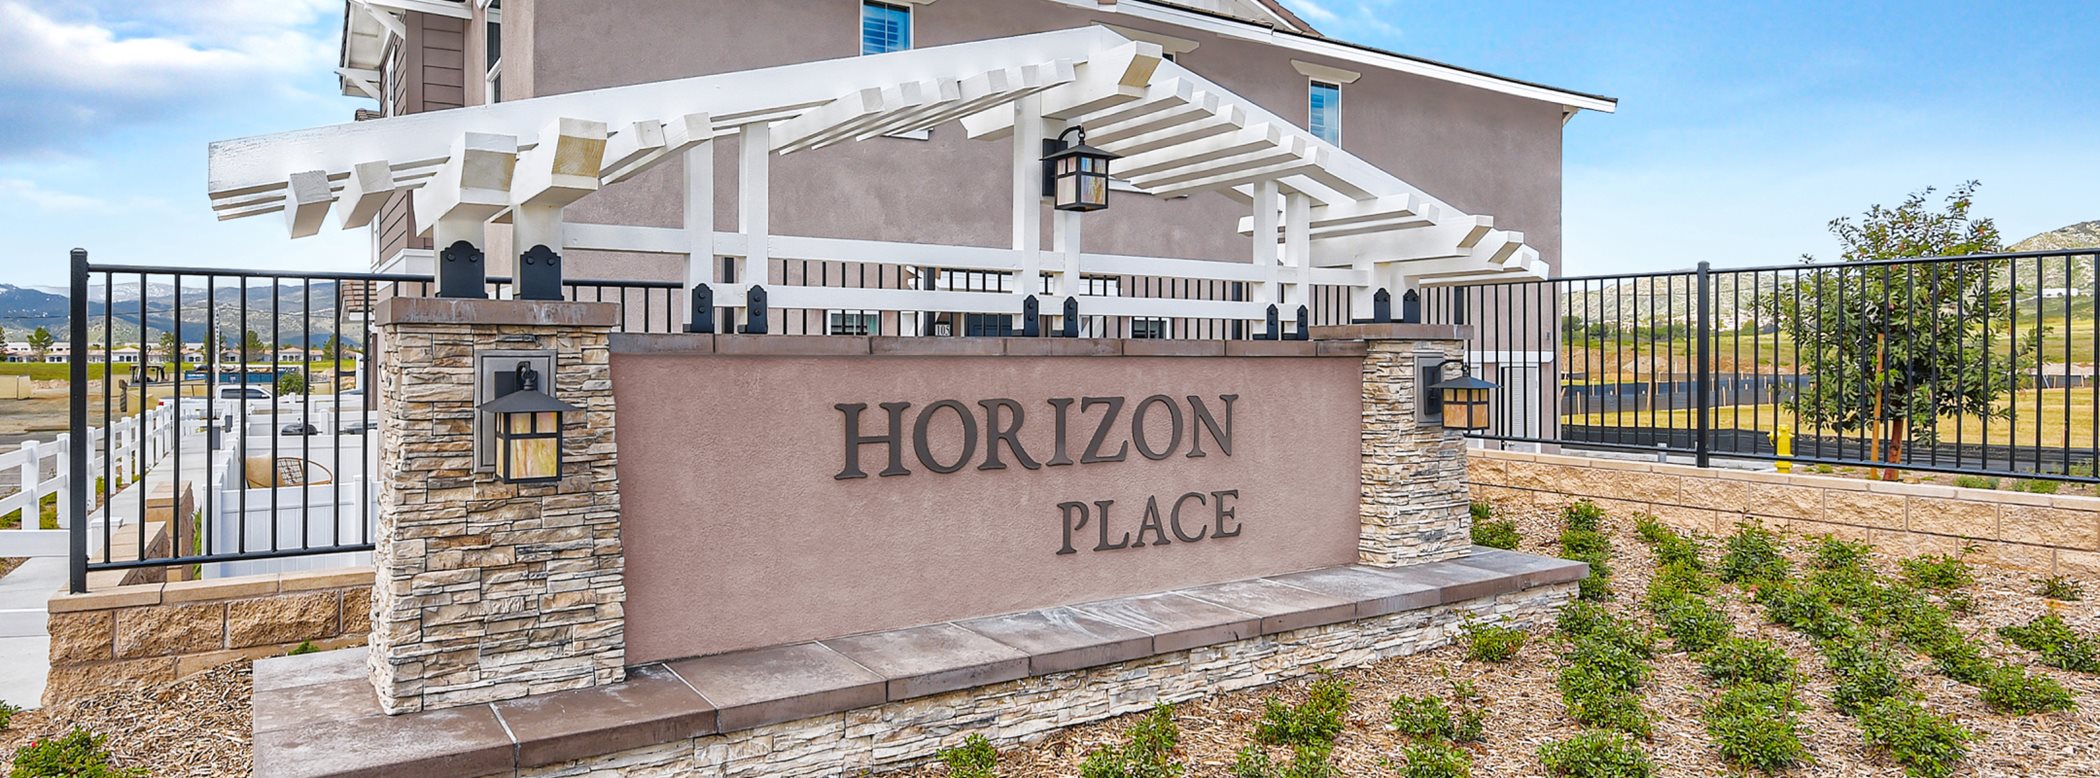 Entry sign for Horizon Place